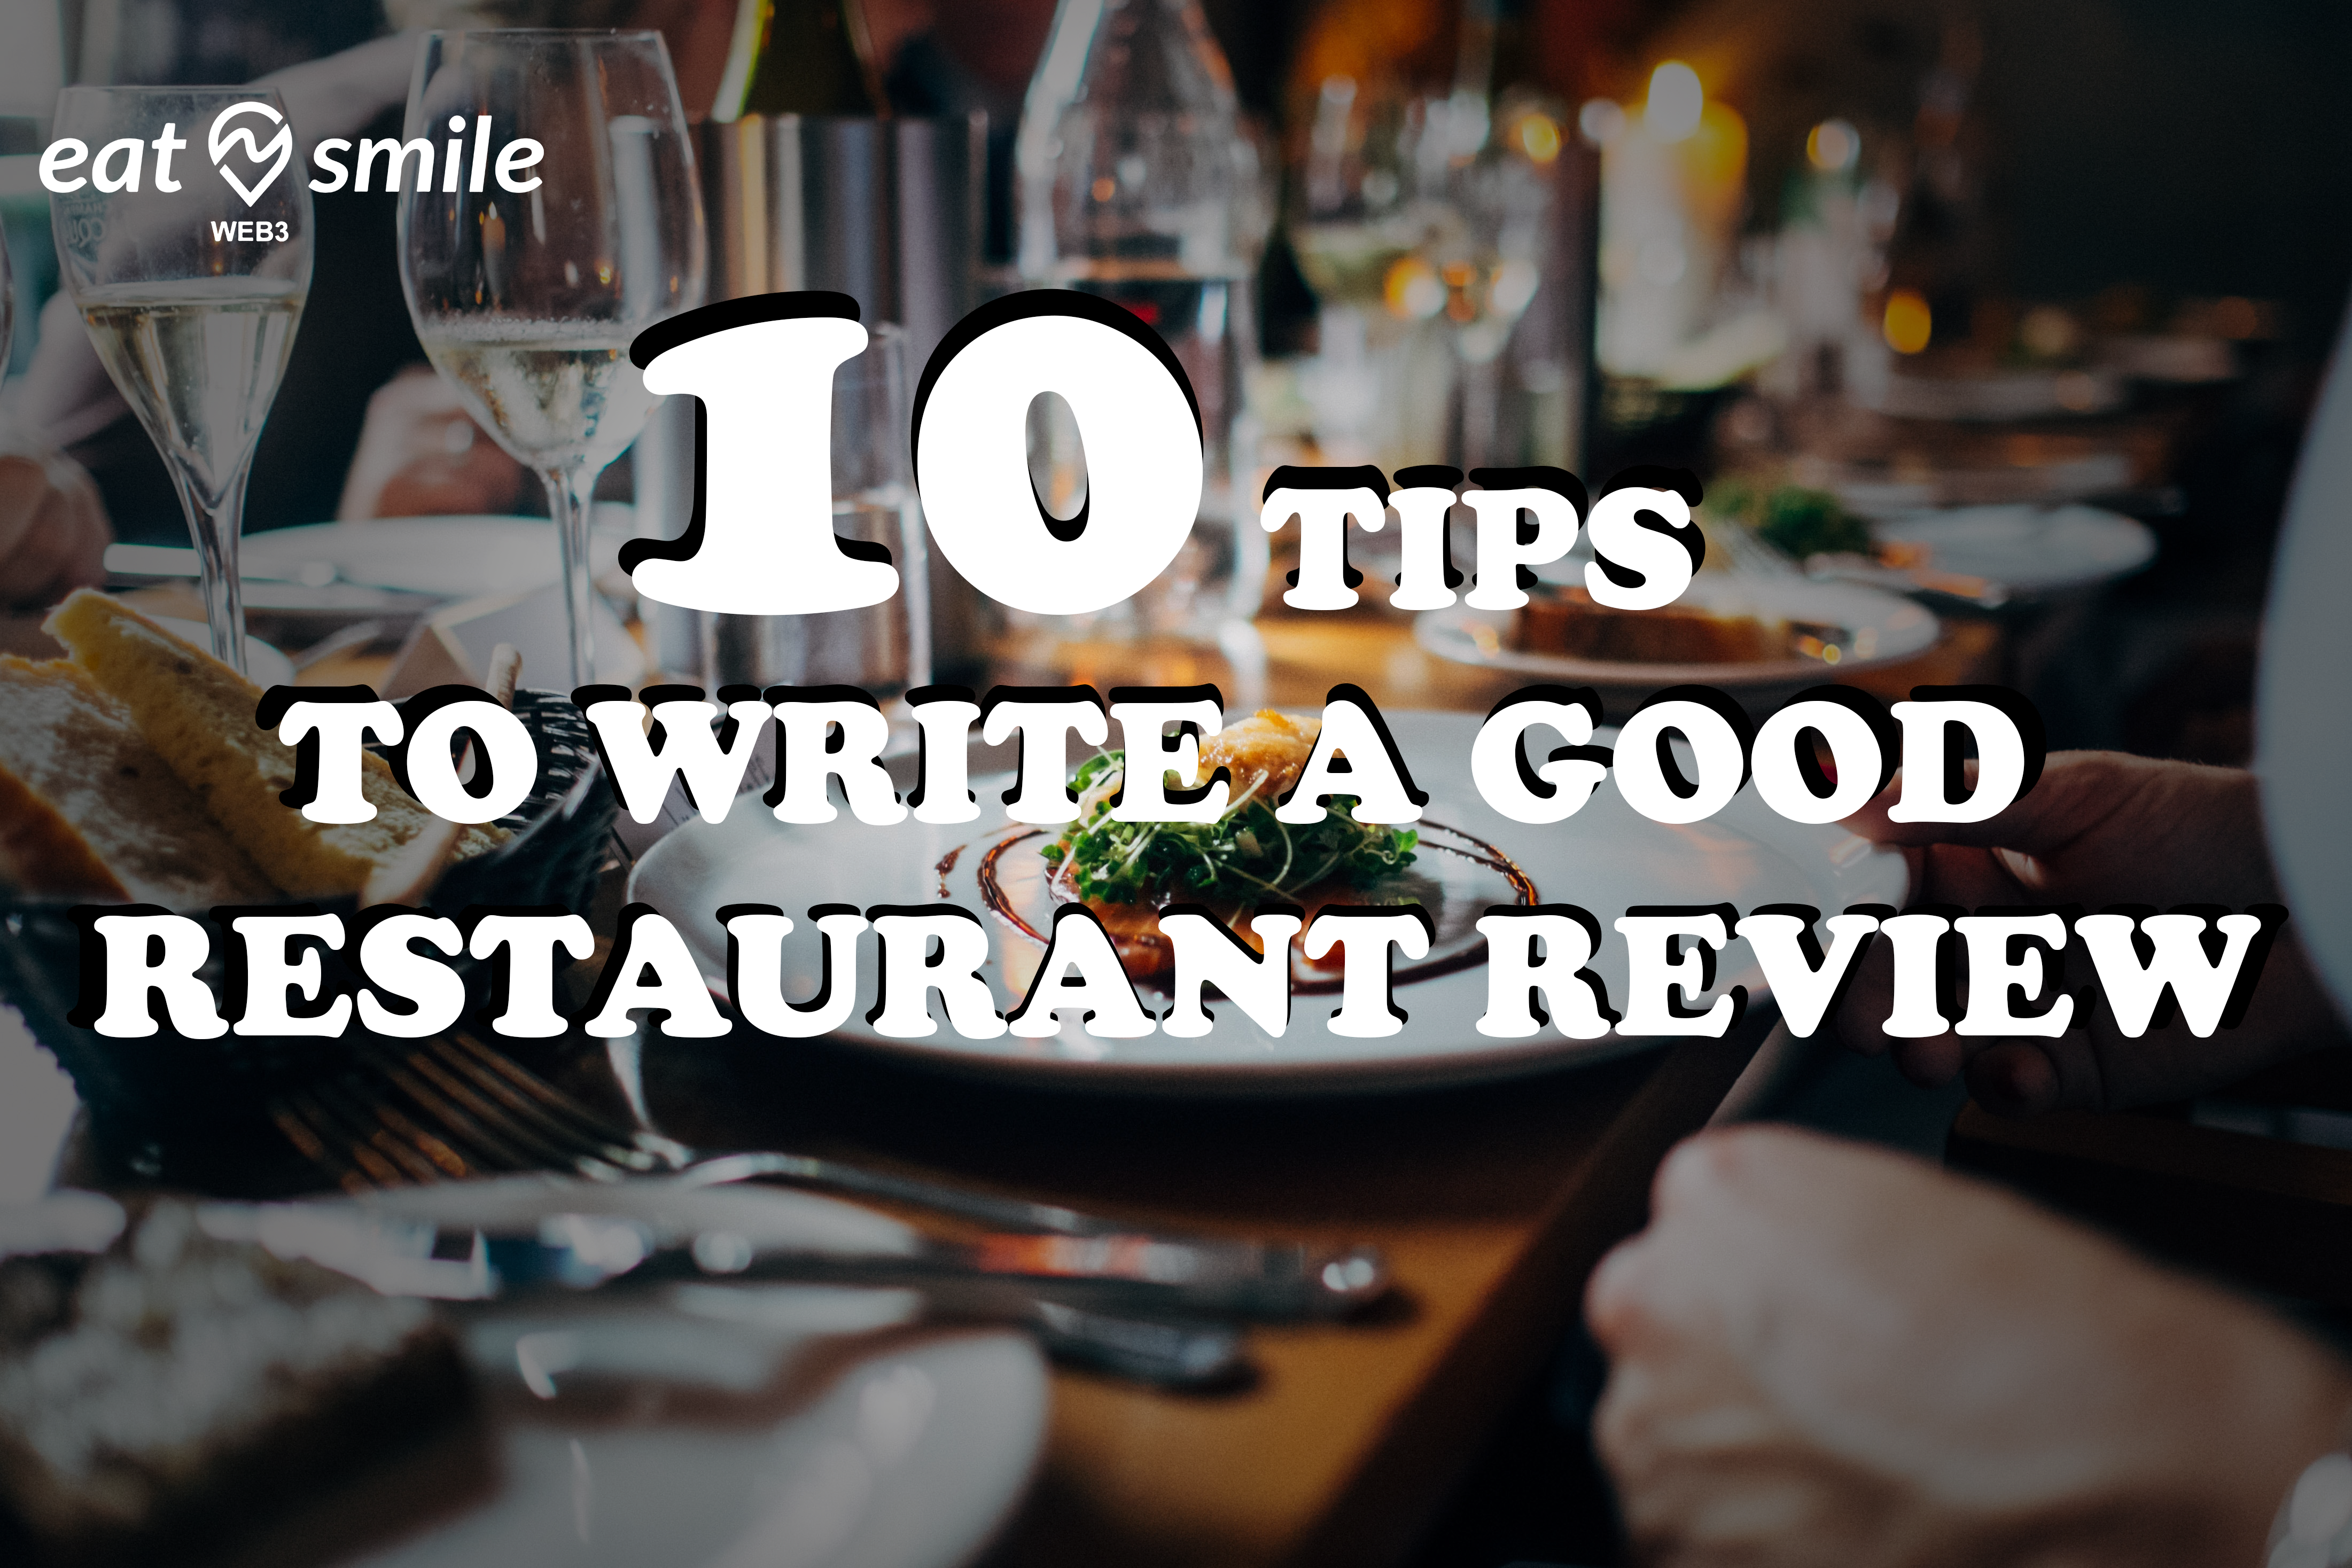 10 TIPS TO write a good RESTAURANT REVIEW